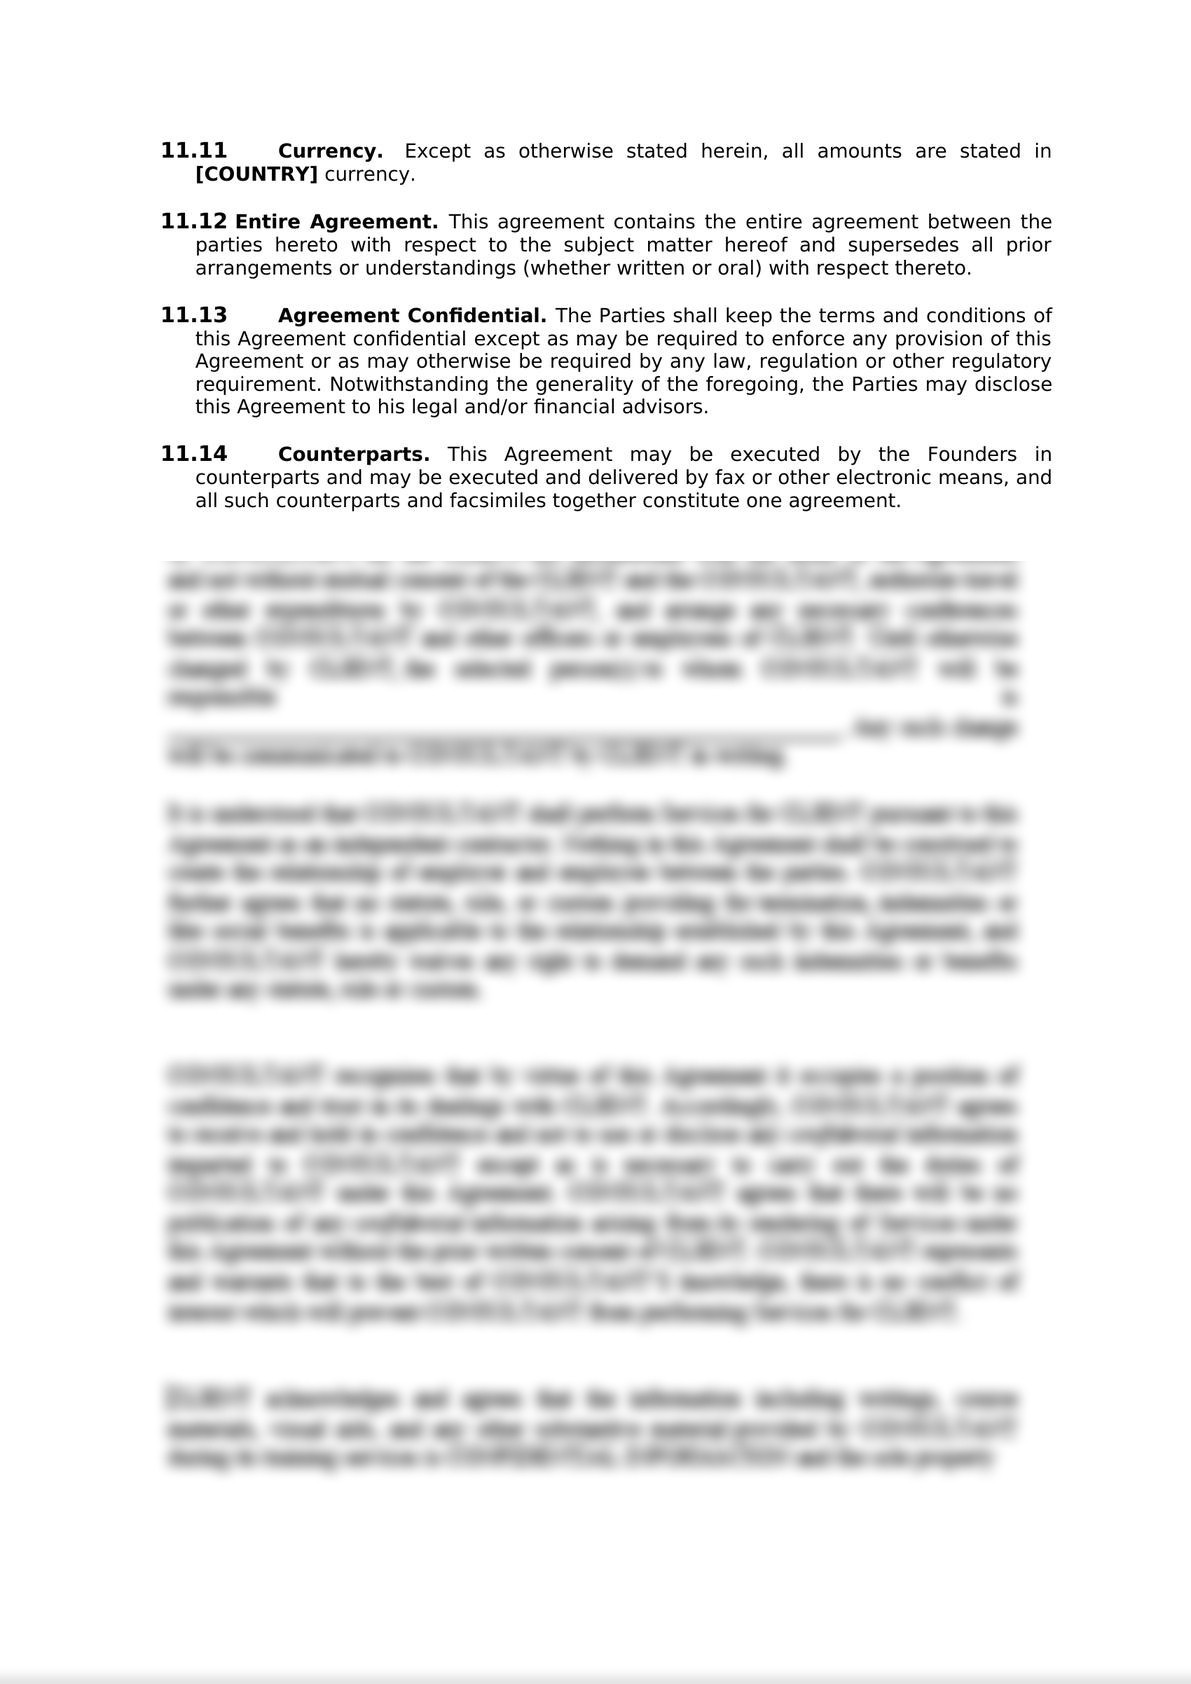 Founders Agreement-7